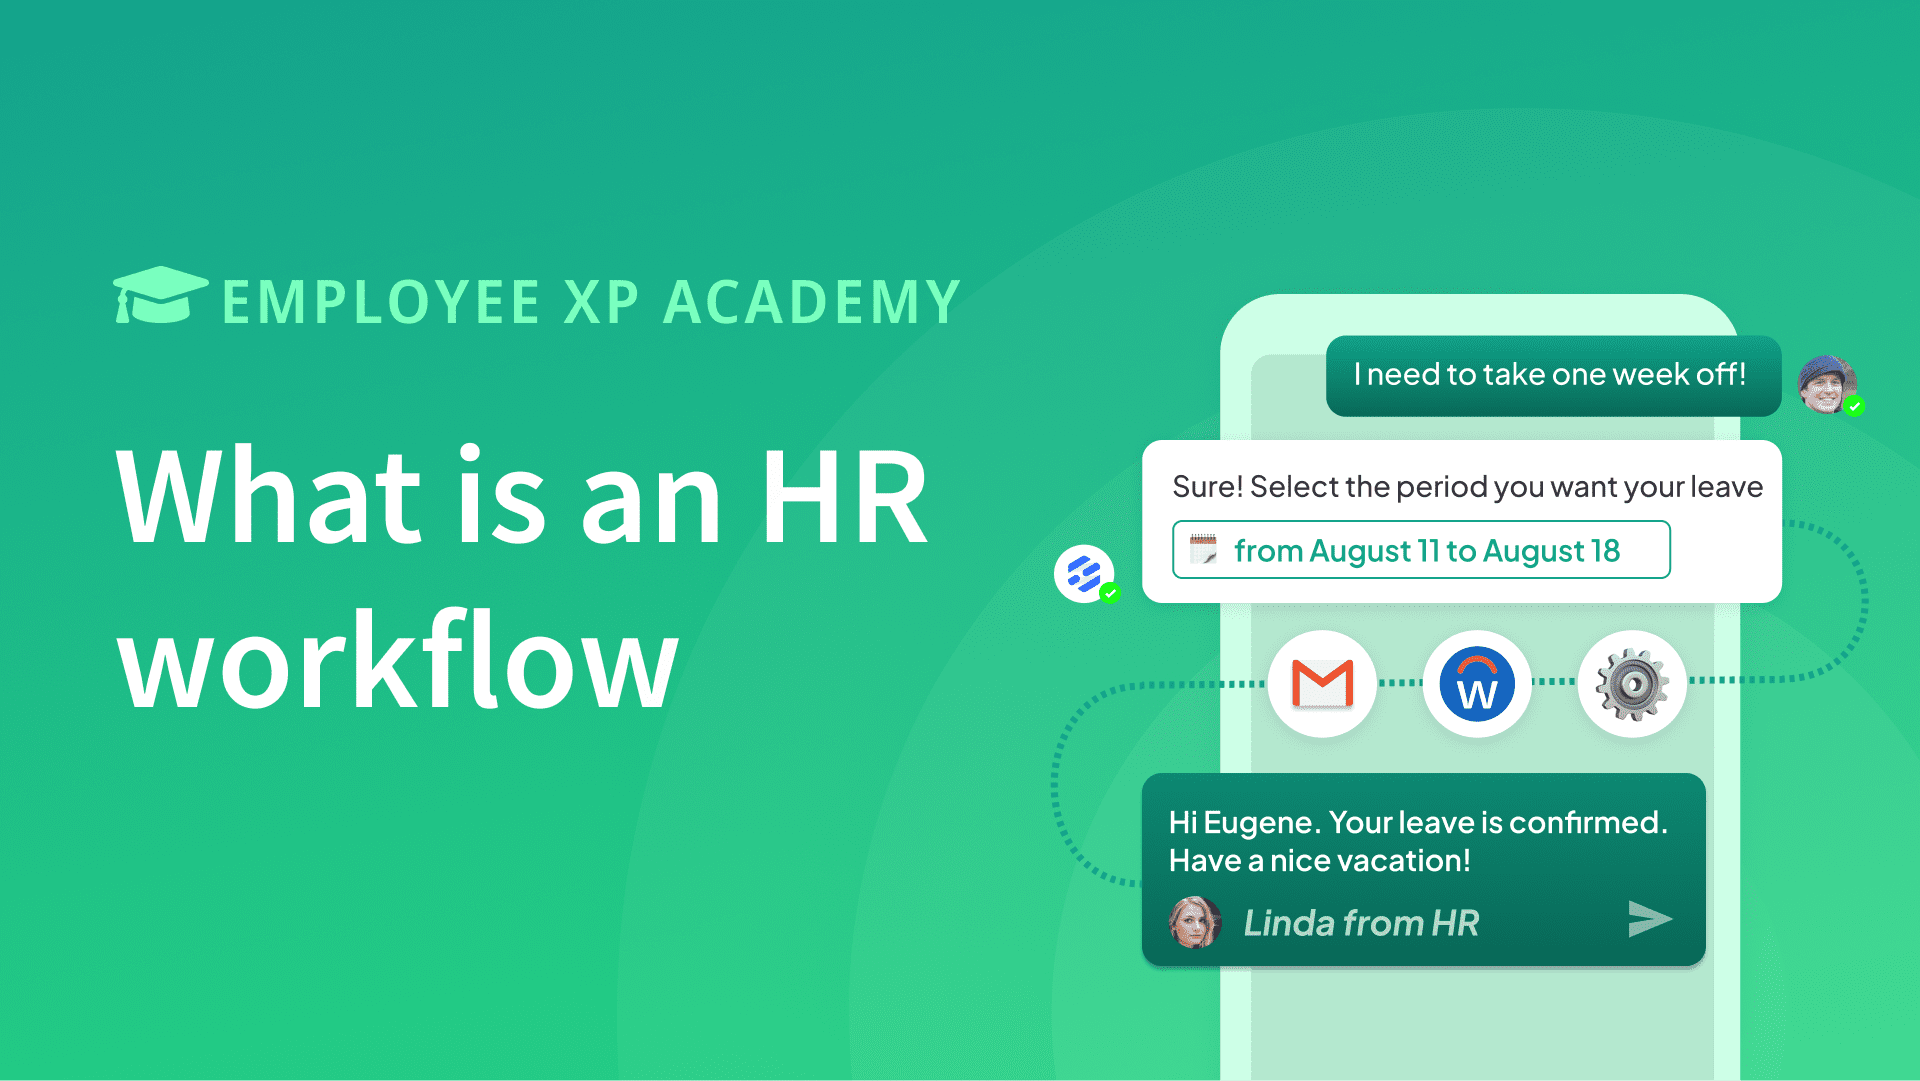 What is an HR Workflow?